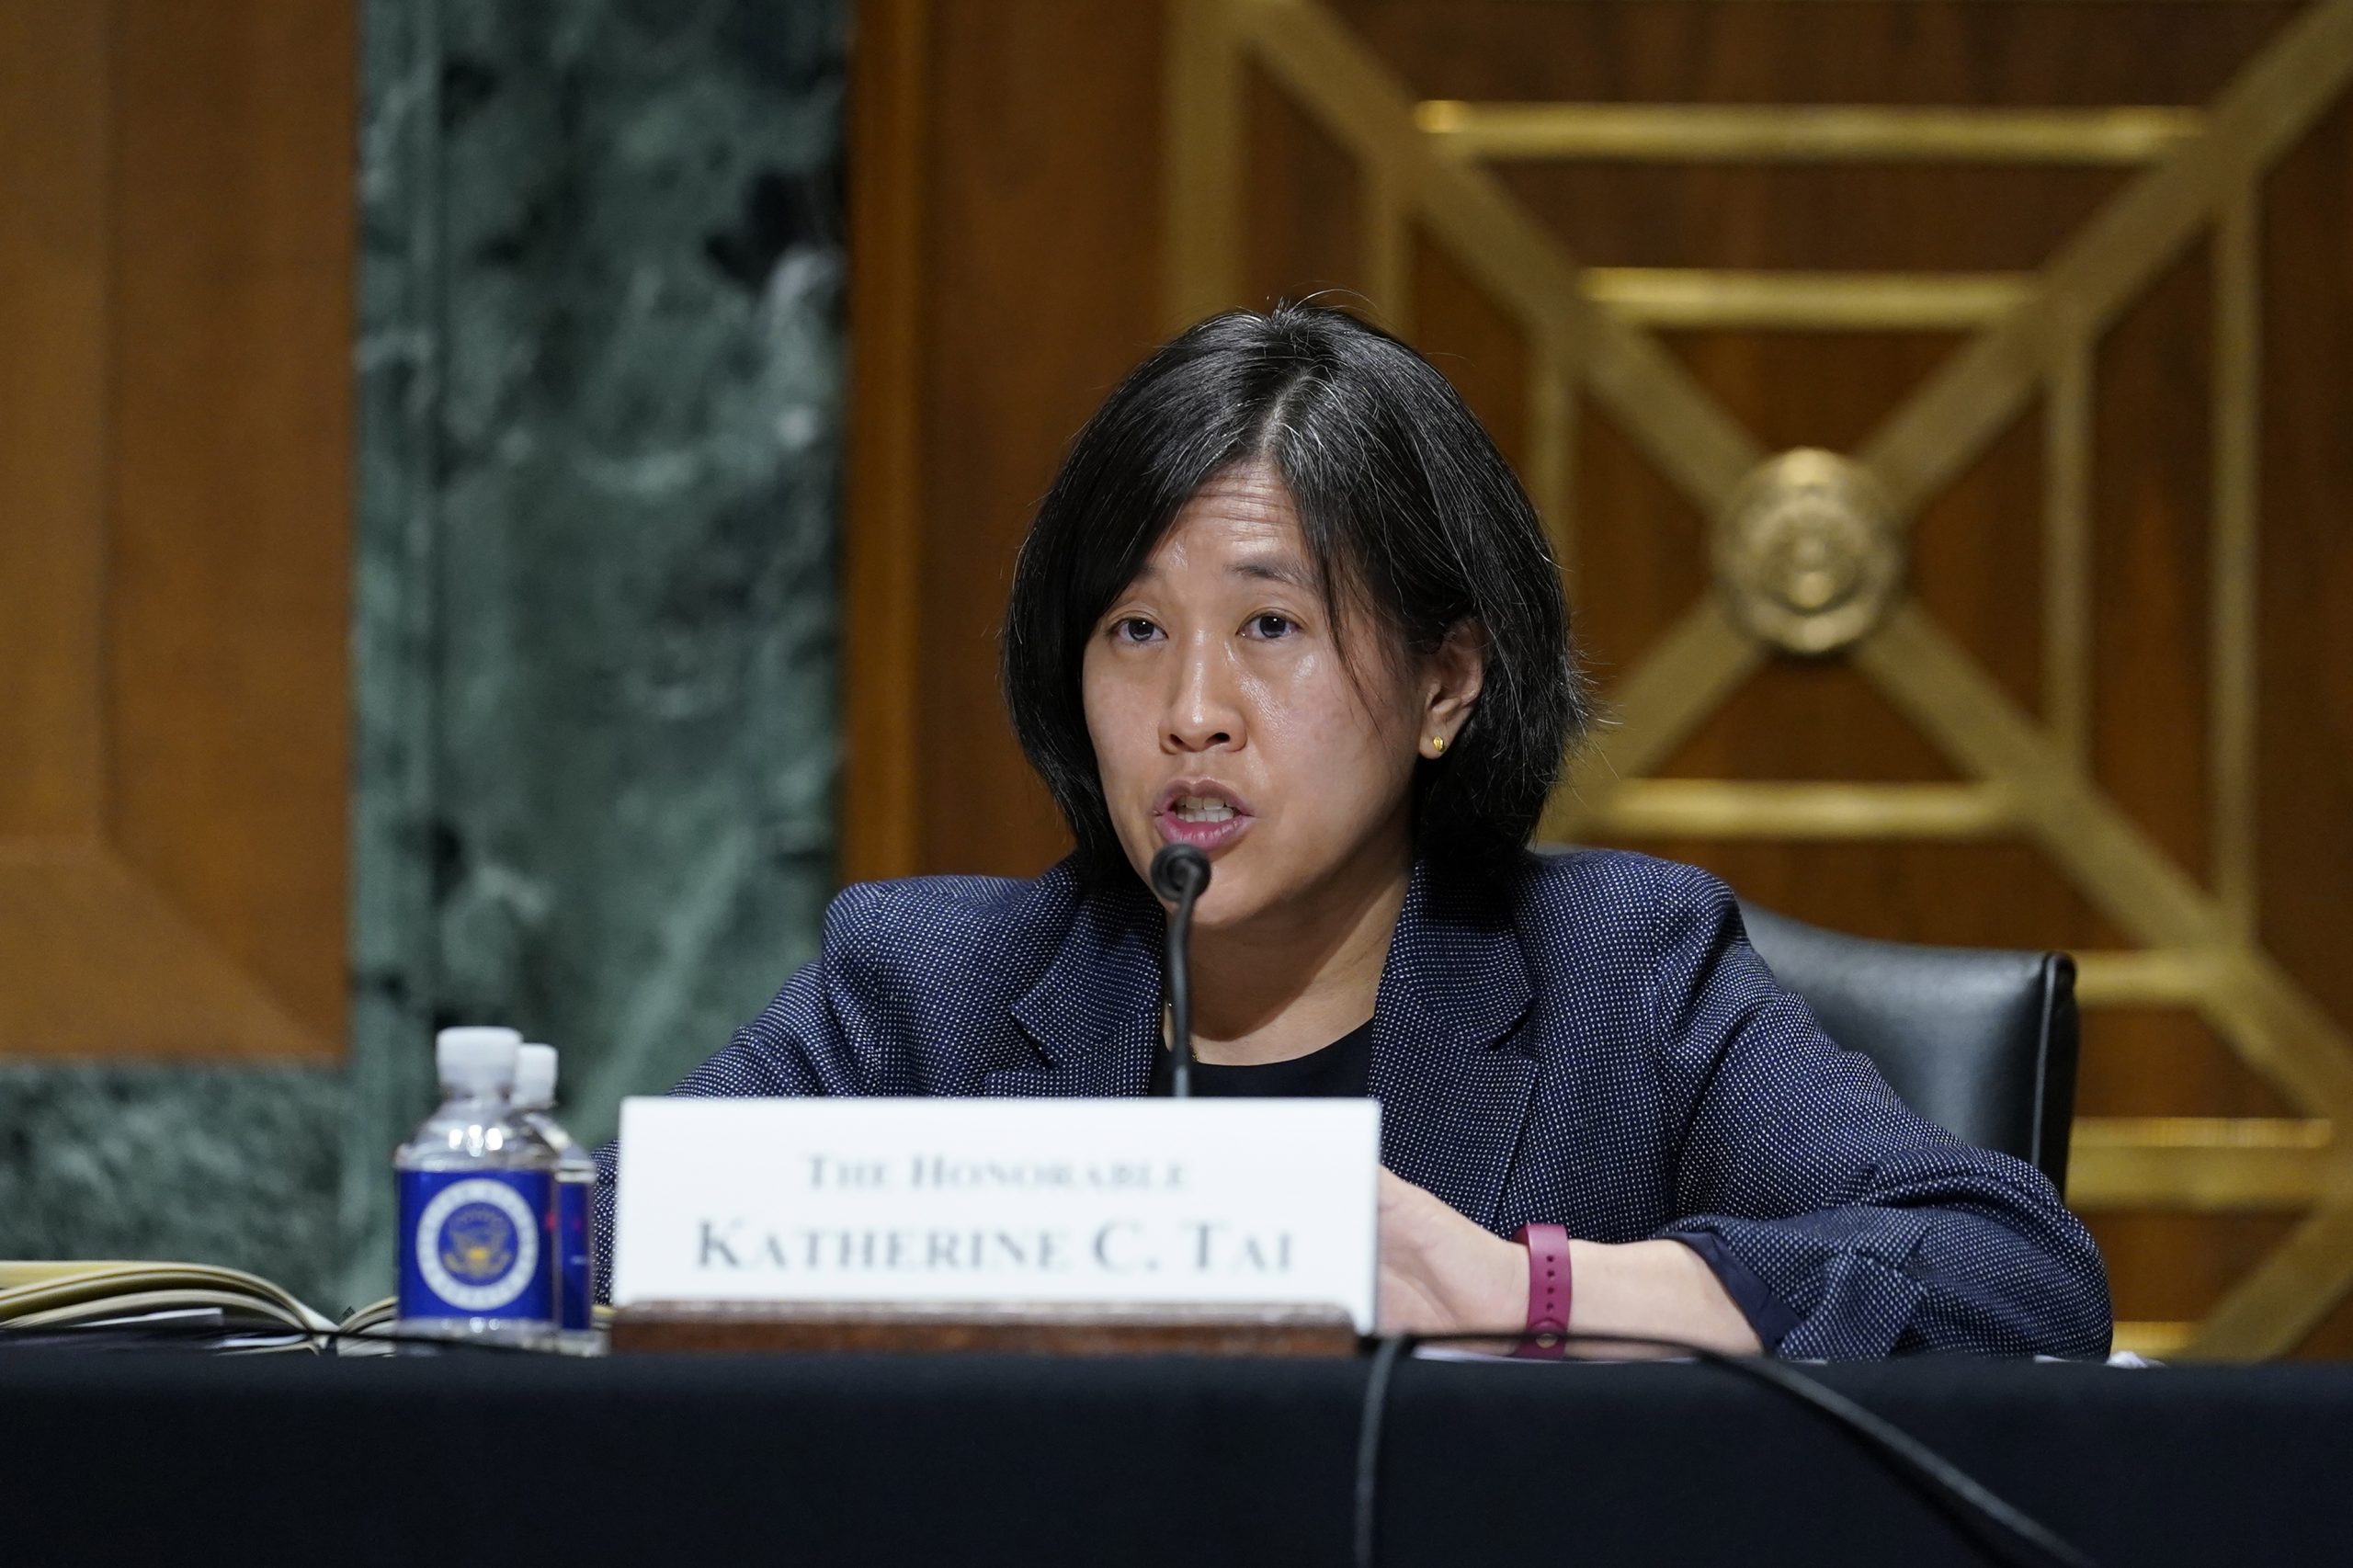 epa09230627 (FILE) - United States Trade Representative Katherine C. Tai testifies before the Senate Finance Committee on Capitol Hill in Washington, DC, USA, 12 May 2021, during a hearing to examine President Joe Biden's 2021 trade policy agenda (reissued 27 May 2021). China's Vice-Premier Liu He and US Trade Representative (USTR) Katherine Tai held their first telephone call on 27 May 2021, the first talks between top trade negotiators of the two countries since US President Joe Biden took office at the White House.  EPA/Susan Walsh / POOL